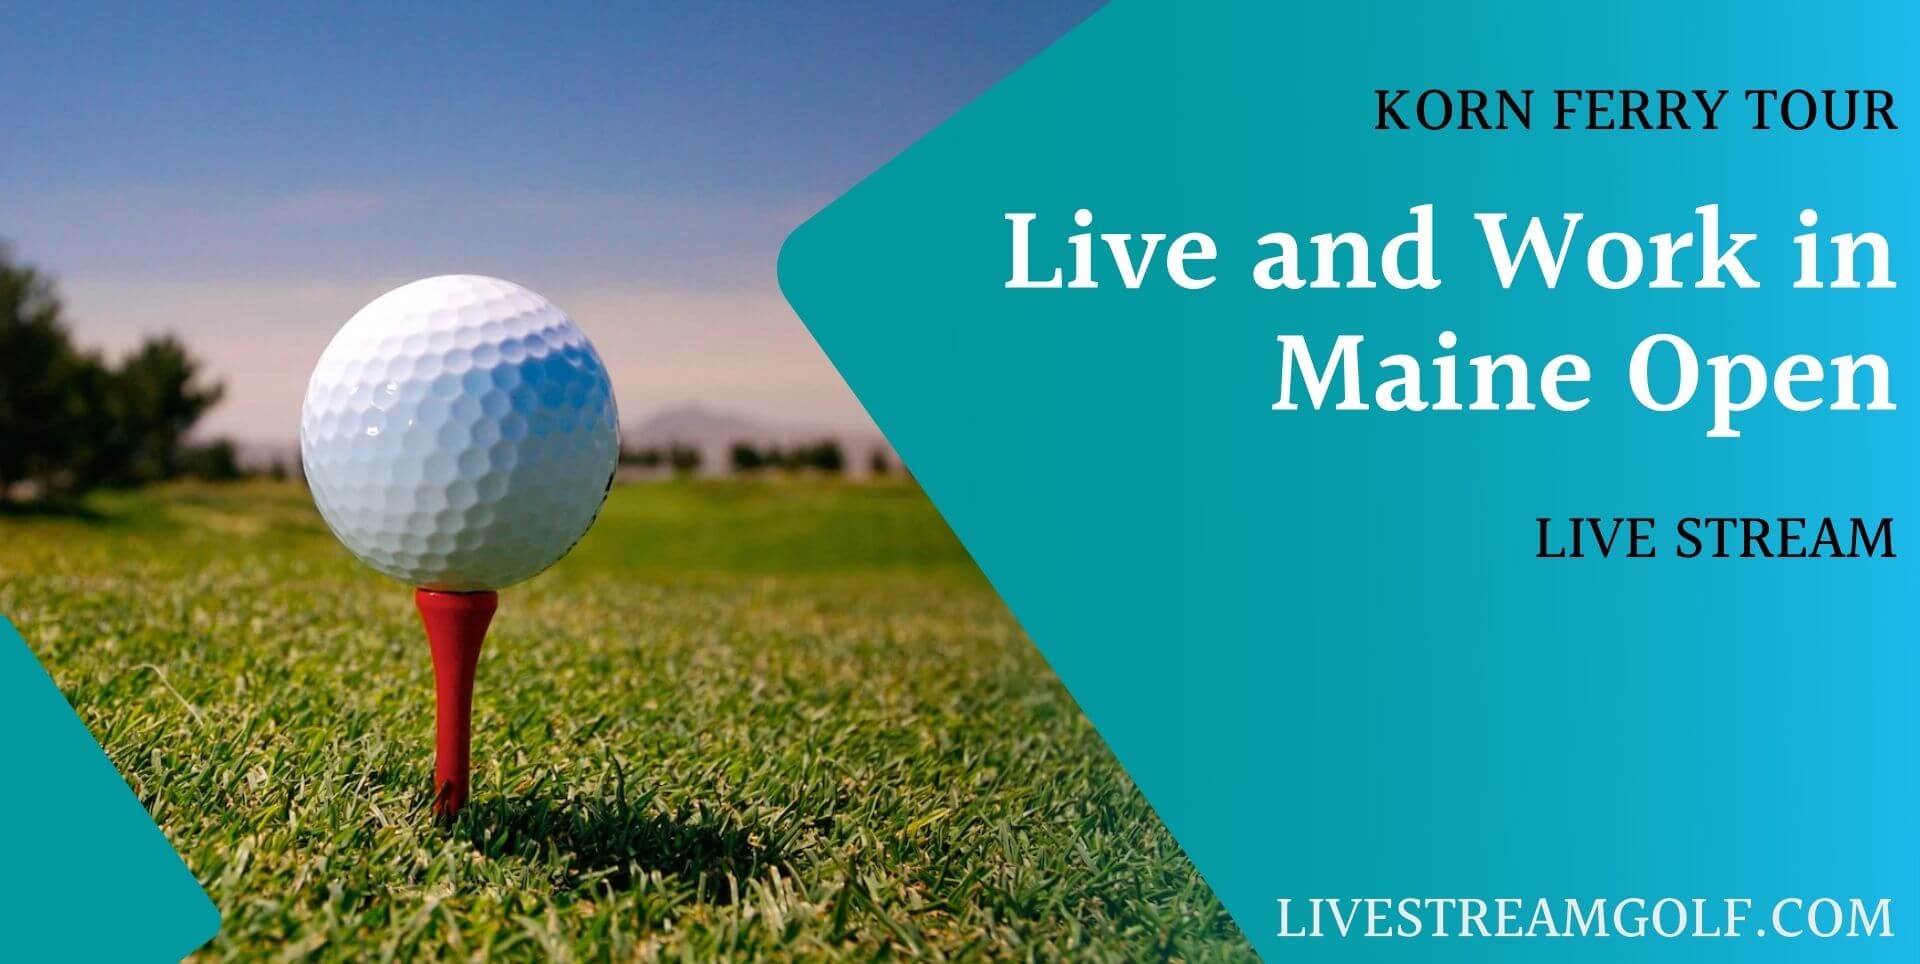 Live And Work In Maine Open Day 1 Live Stream: Korn Ferry 2022